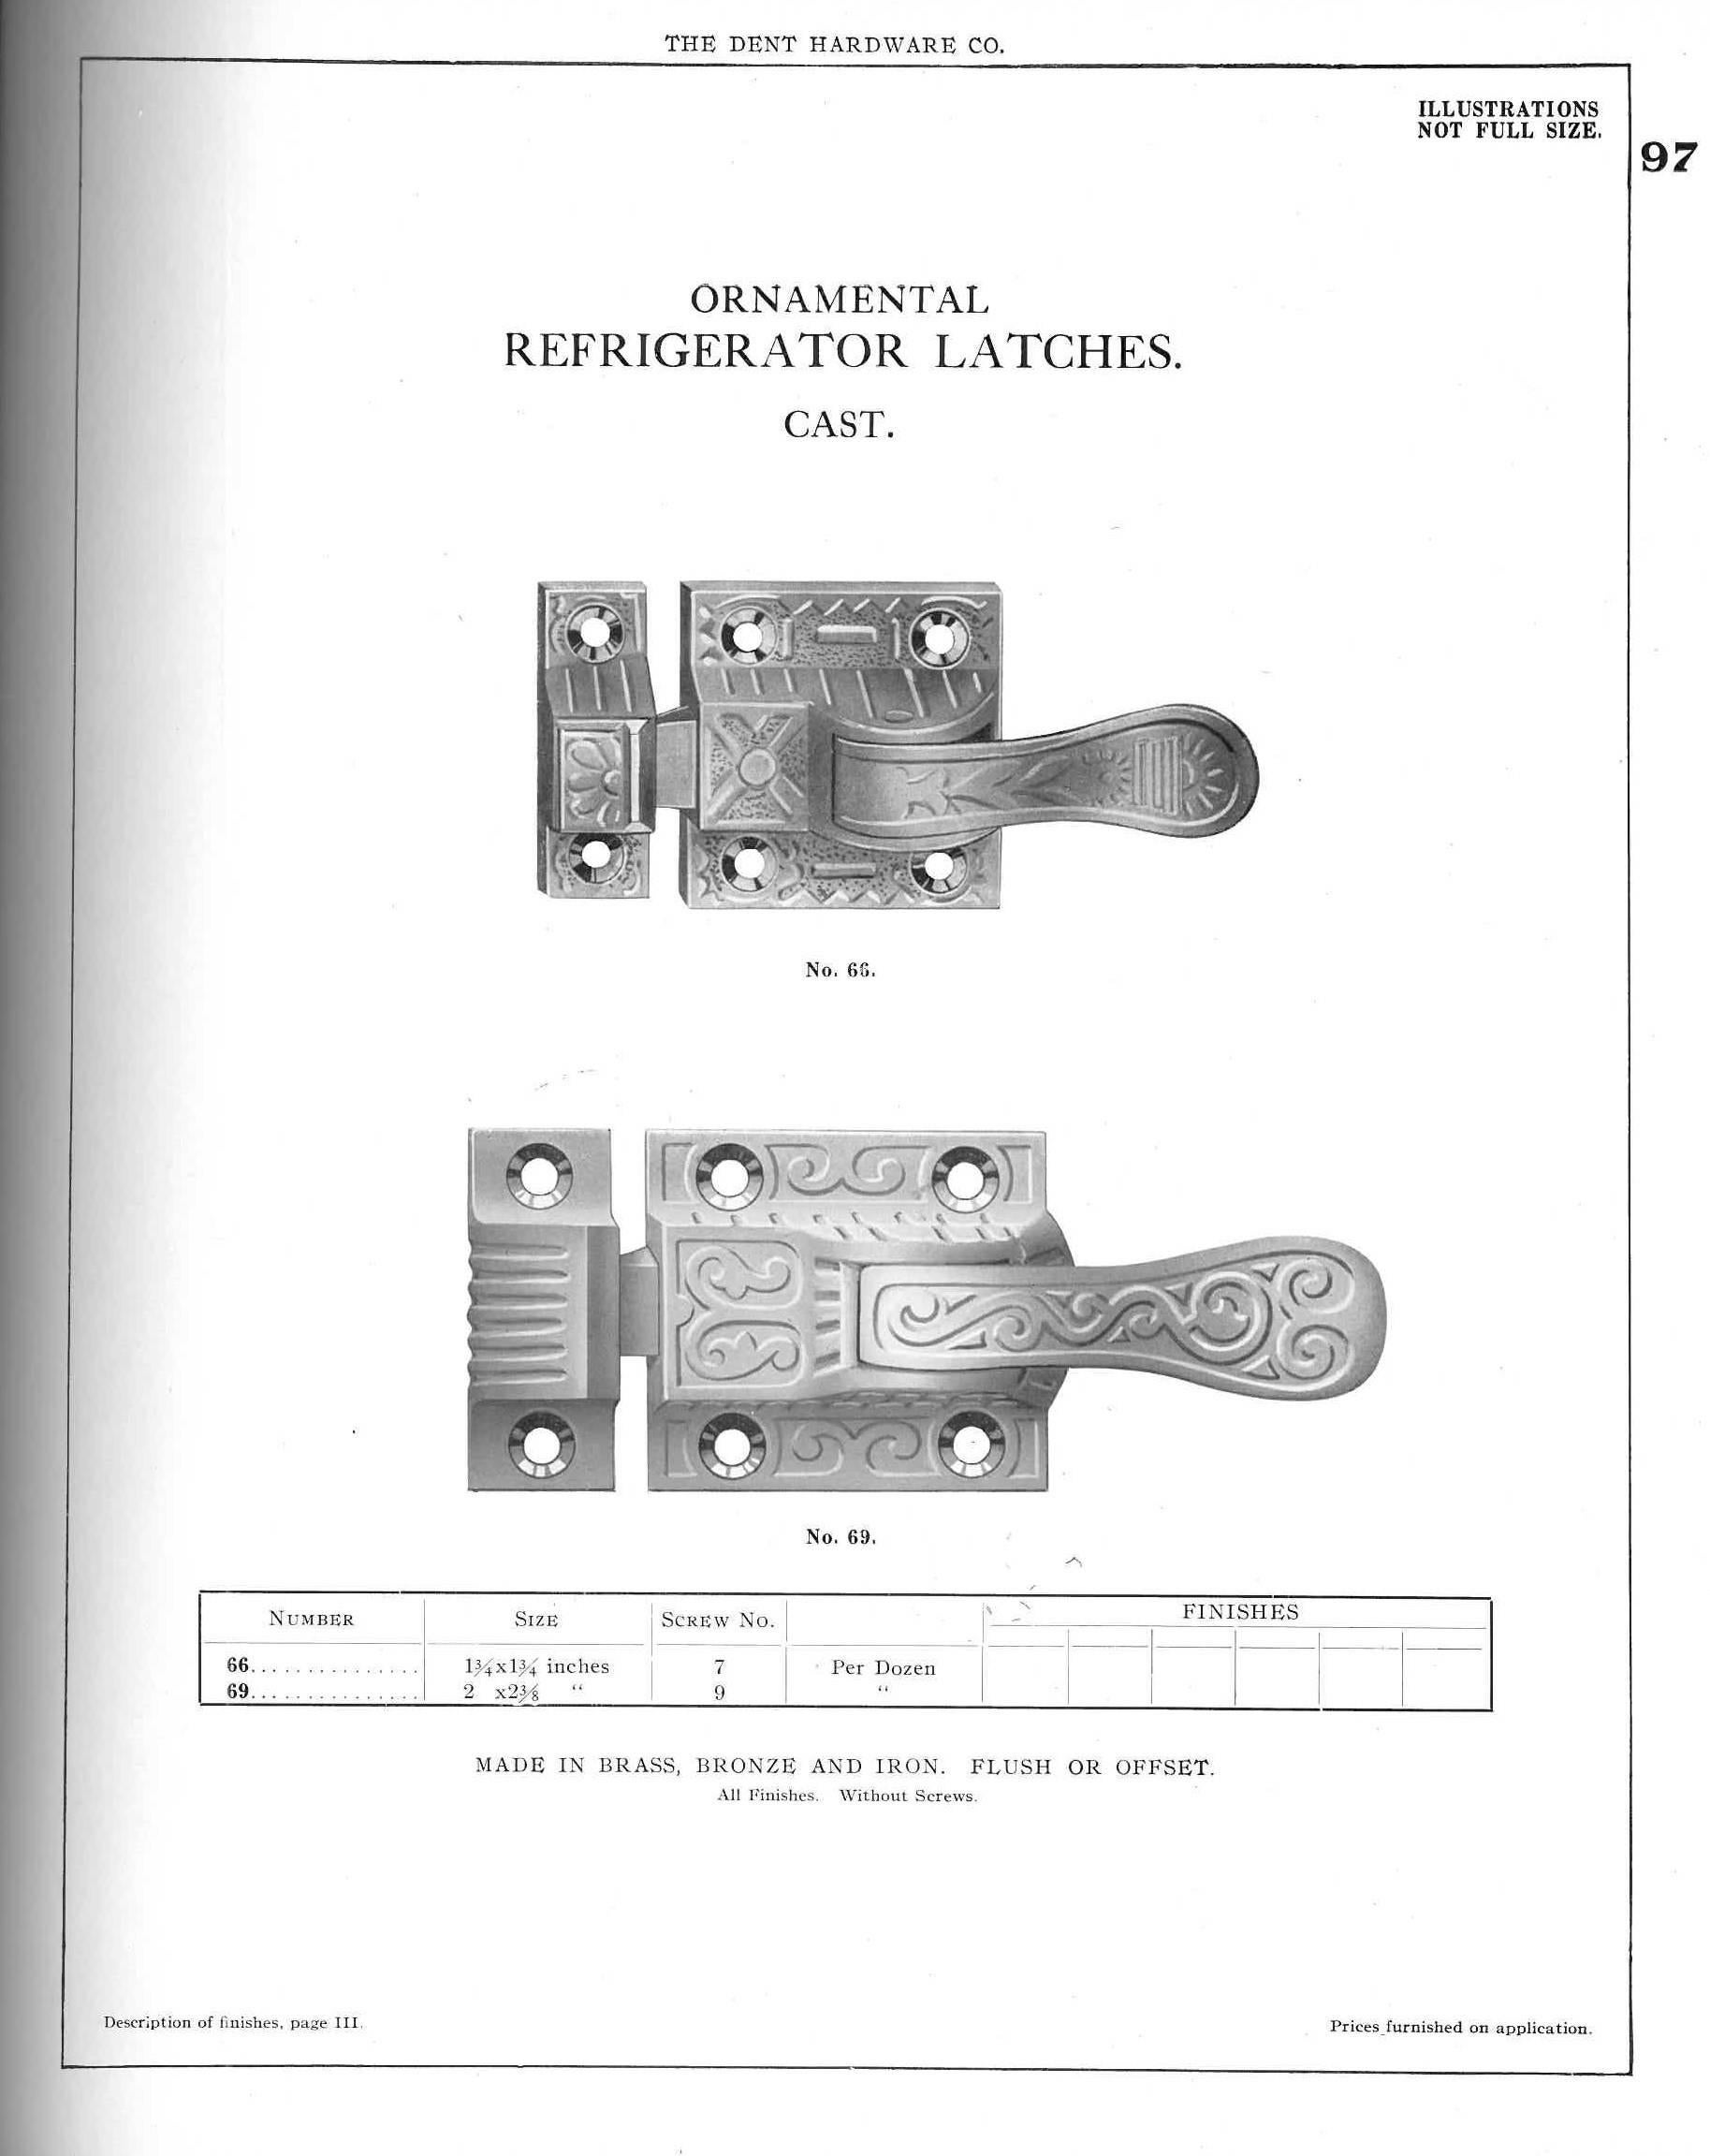 Paper Dent Hardware Co. Trade Catalogue (Book) For Sale